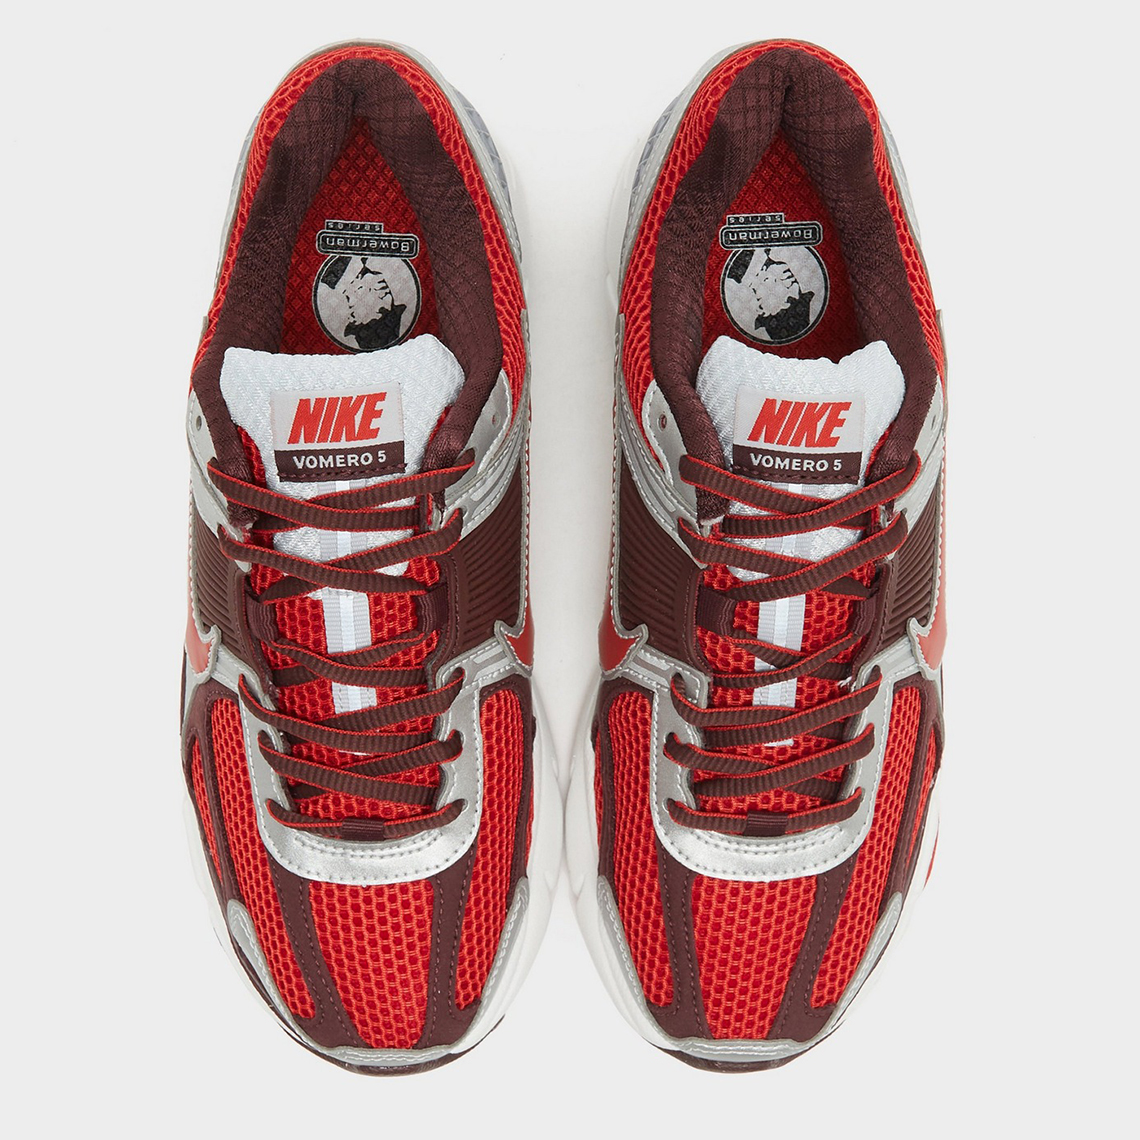 Nike Zoom Vomero 5 Team Red 3